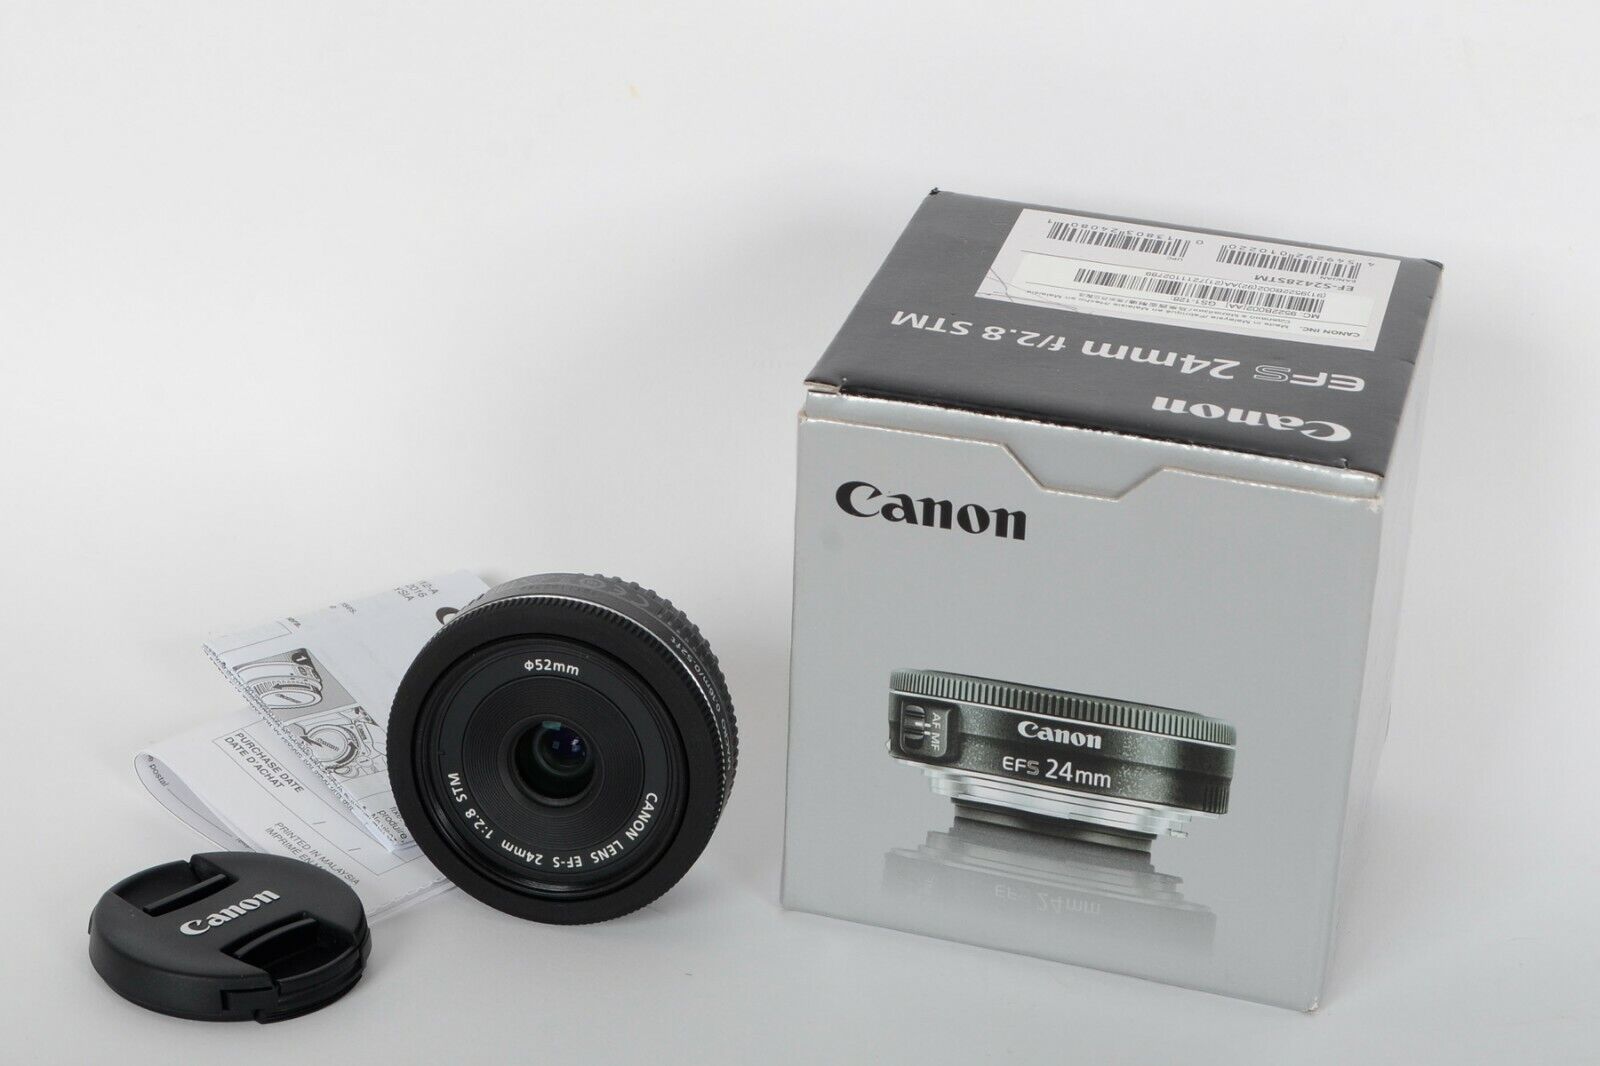 Canon EF-S 24mm f/2.8 STM Lens Mint condition Canon 9522B002